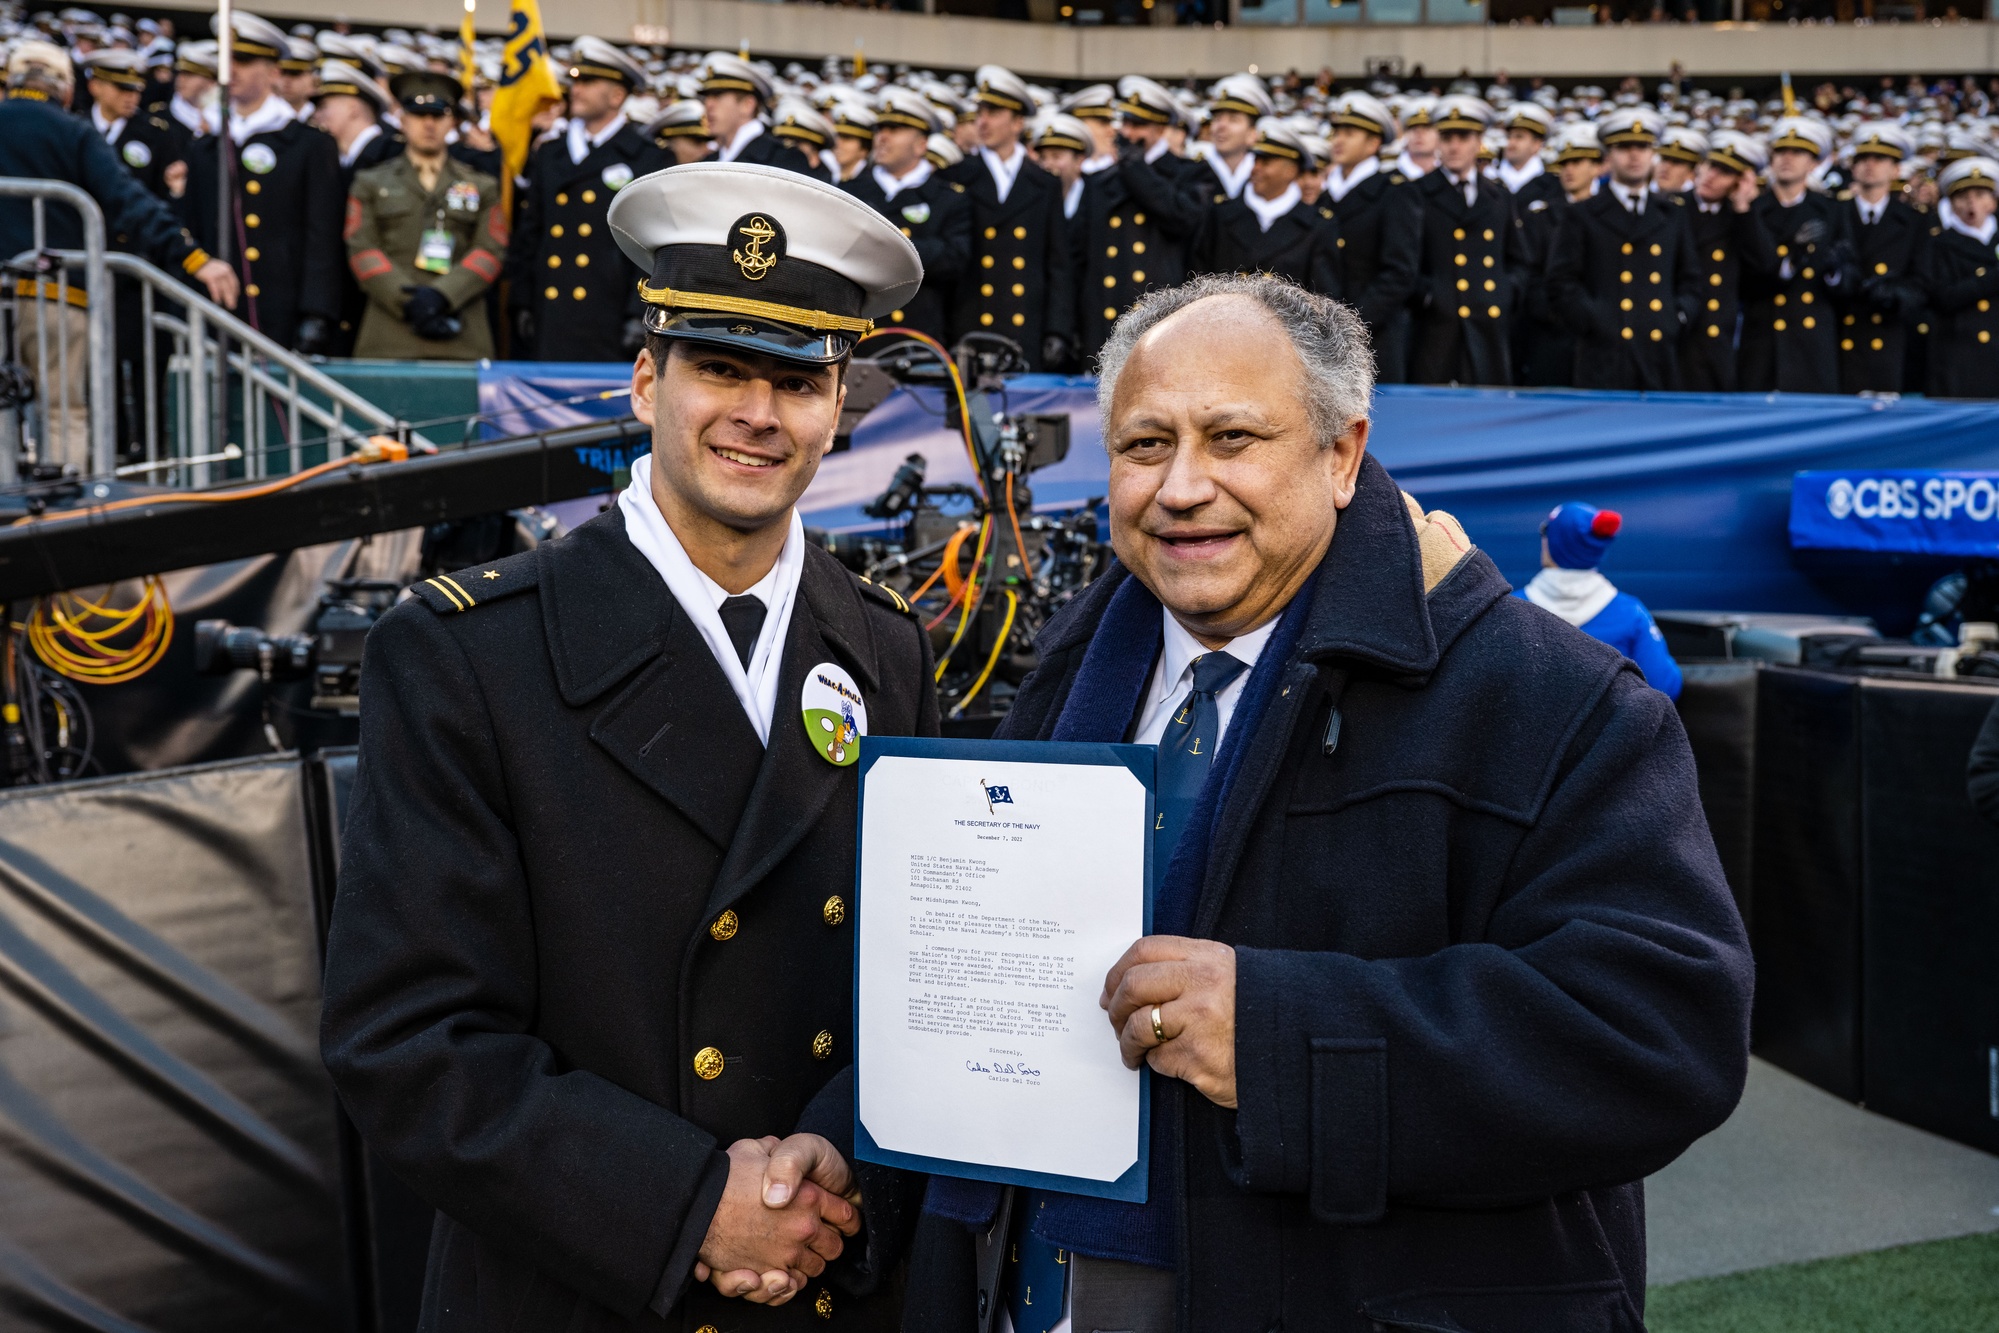 DVIDS - Images - SECNAV Attends 2022 Army-Navy Game [Image 12 of 15]